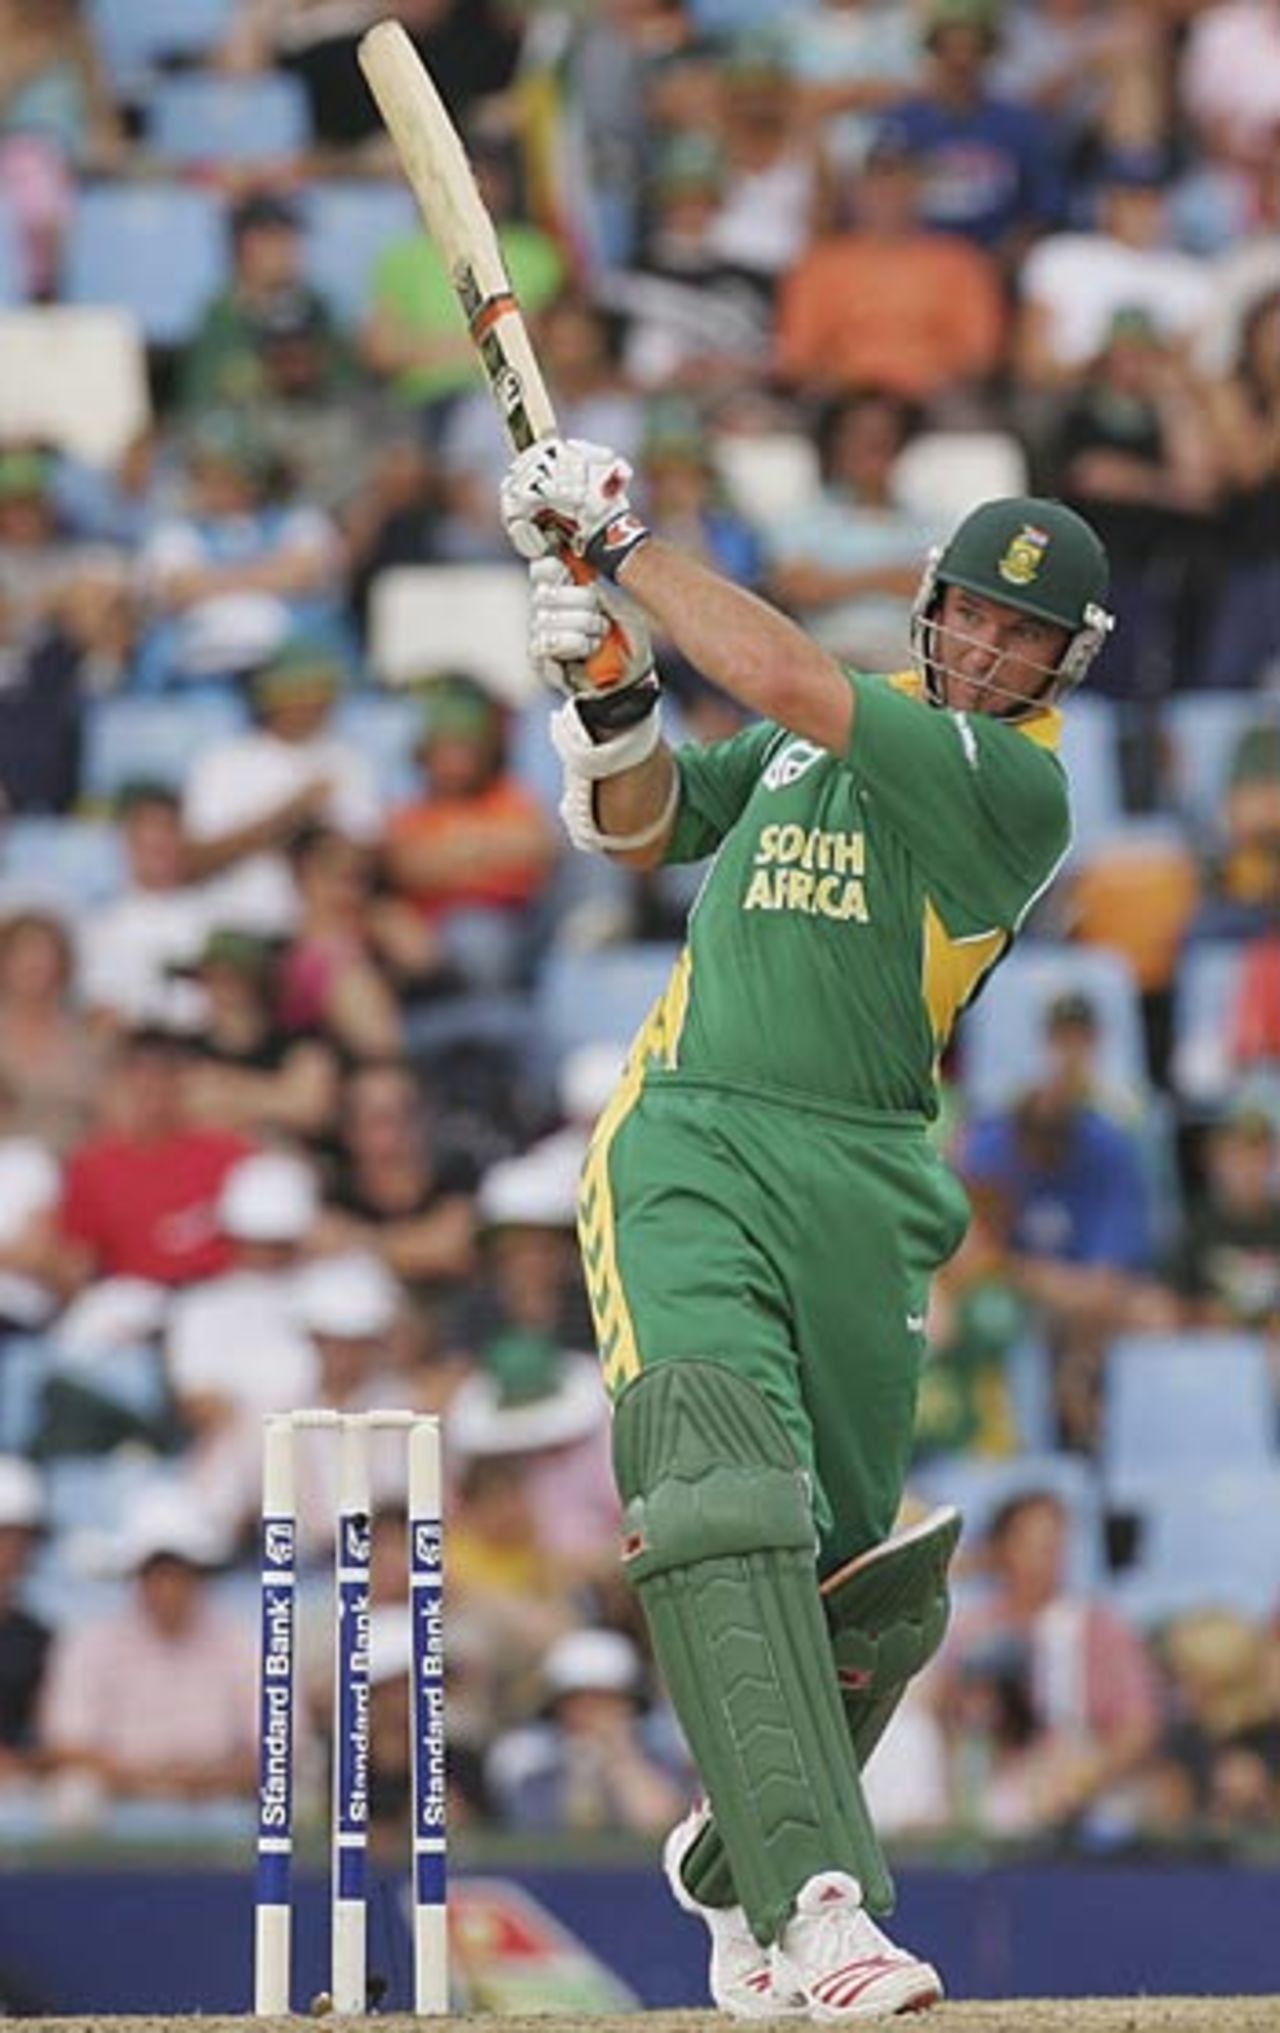 Graeme Smith will be hoping to lead his side to a 2-0 lead in the series